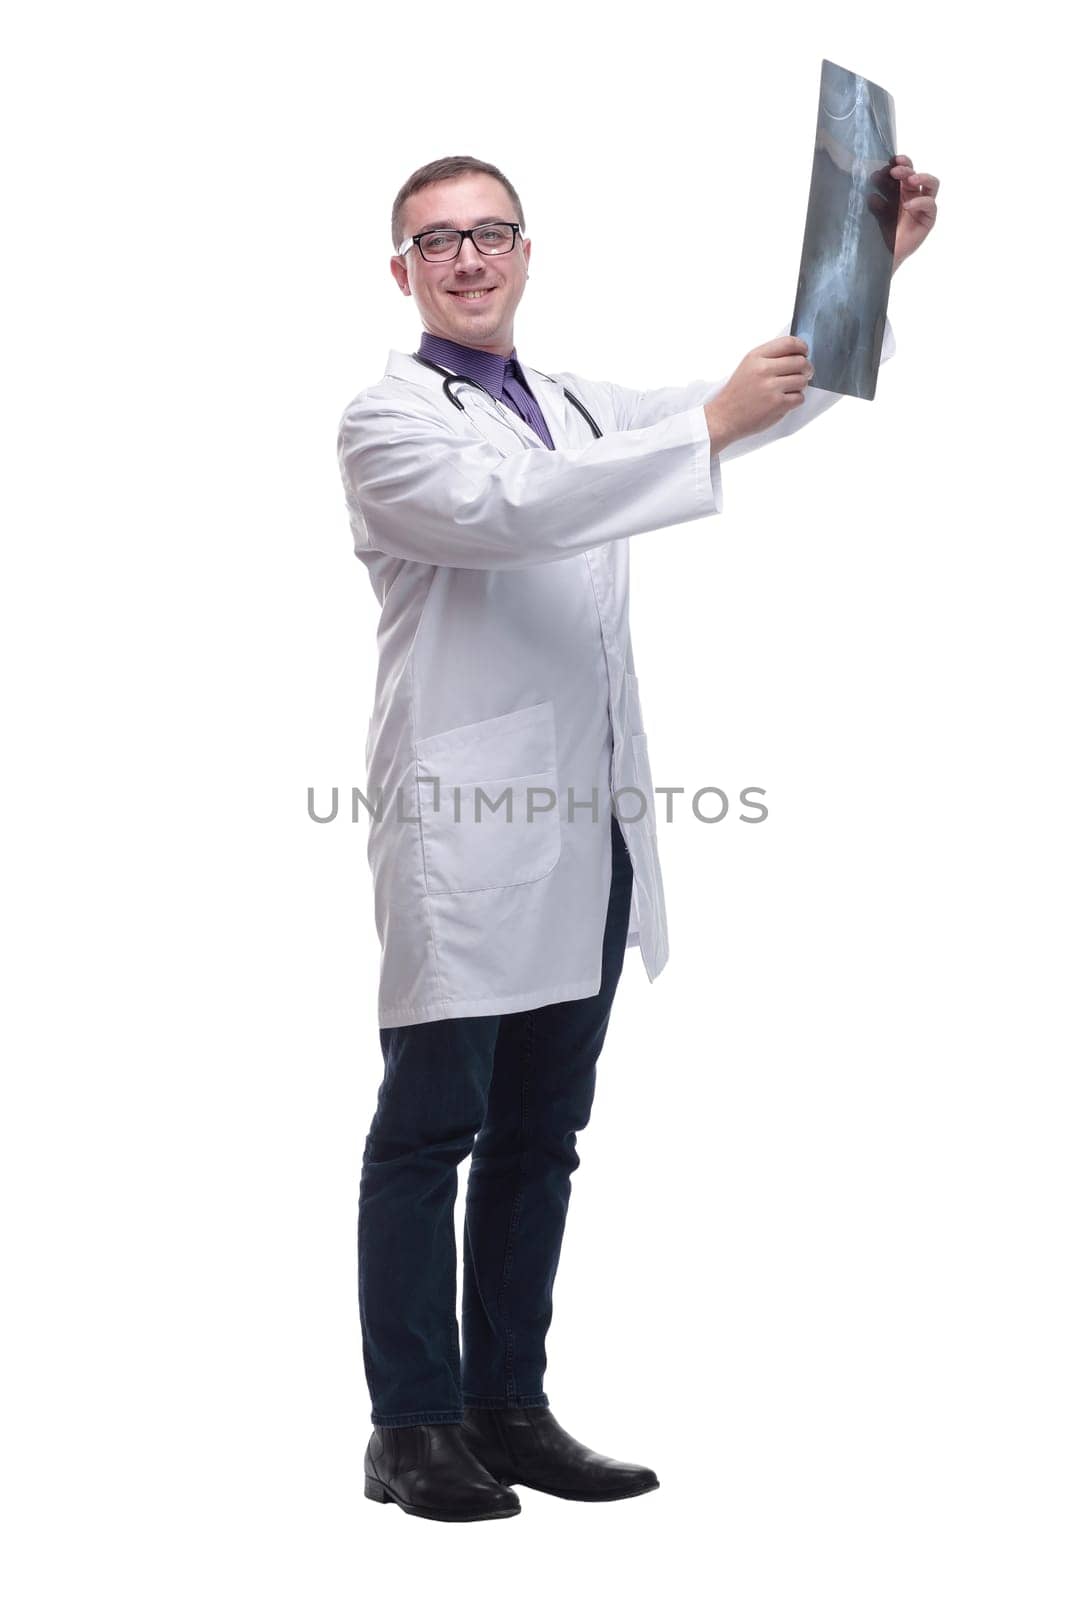 Attractive doctor examining an x-ray and looking at the camera seriously